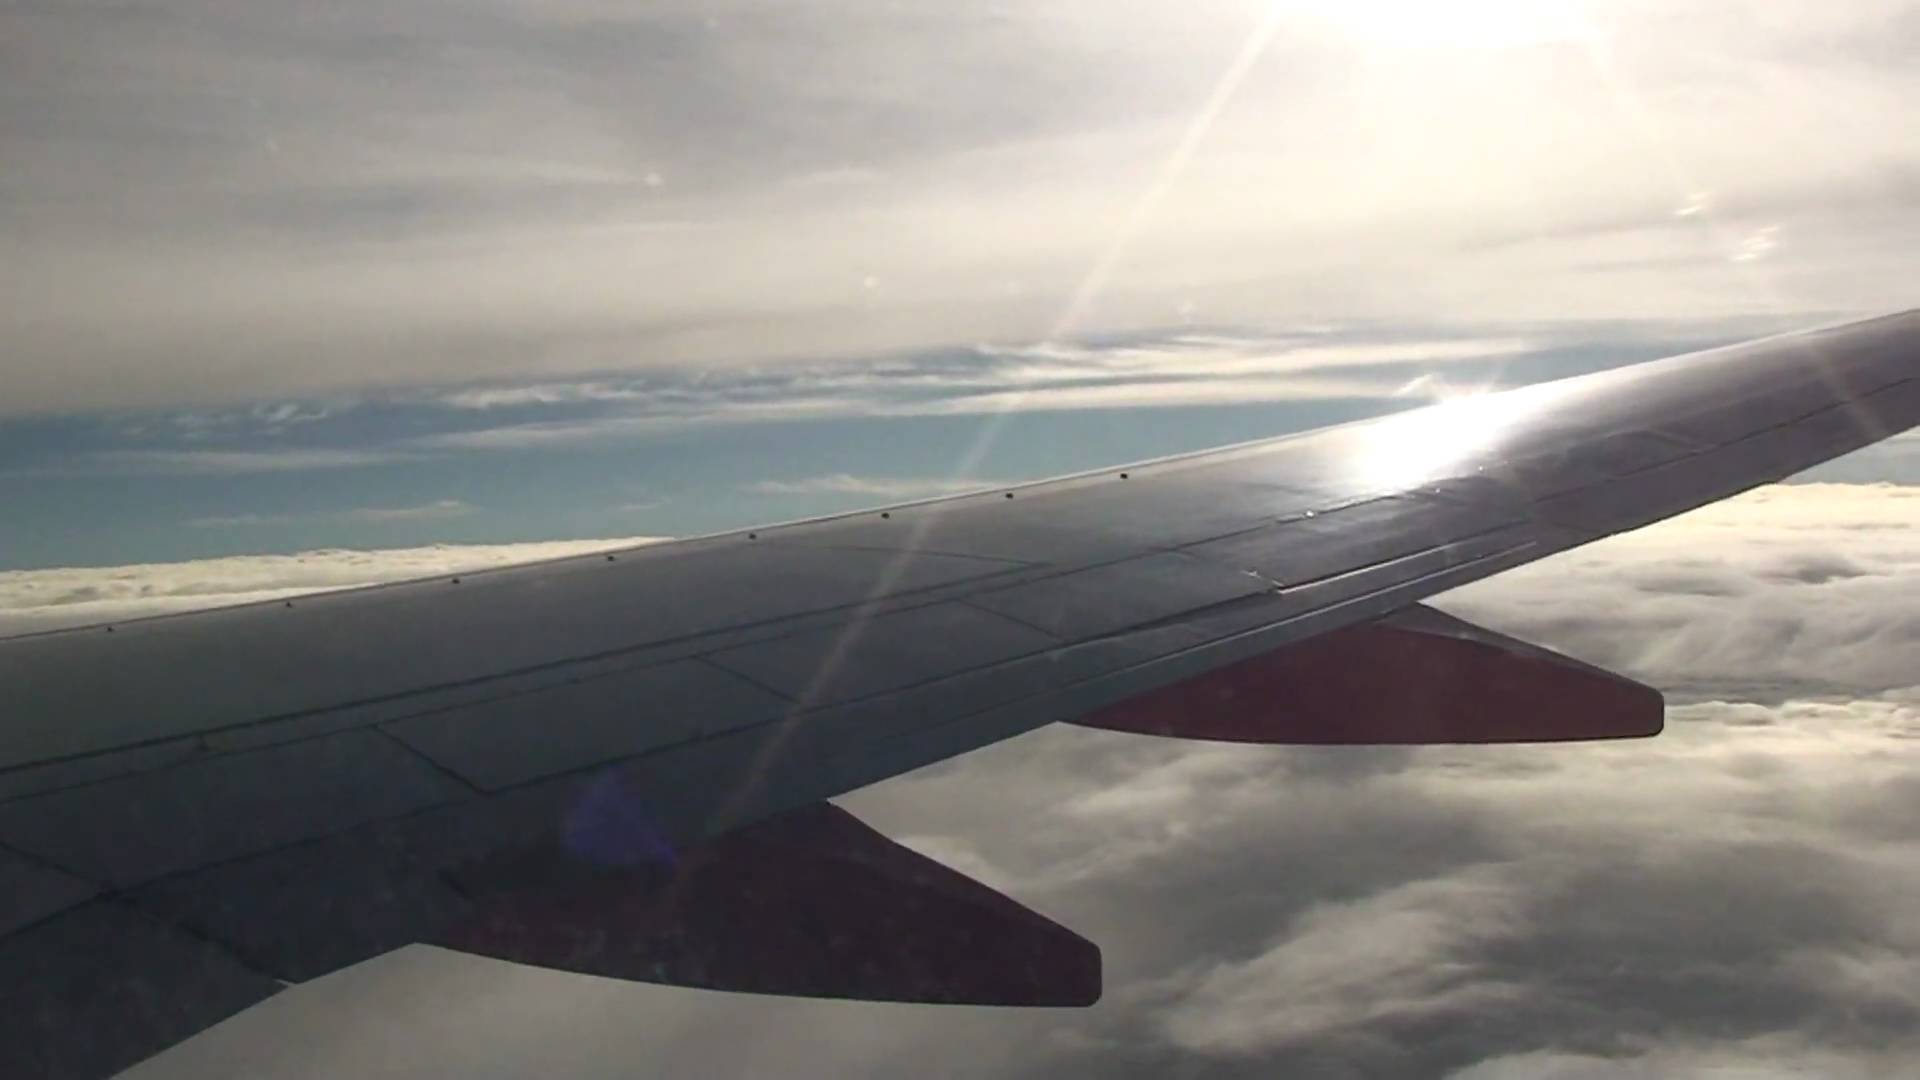 SOUTHWEST AIR LOOKING OUT AIRPLANE WINDOW IN HD - YouTube